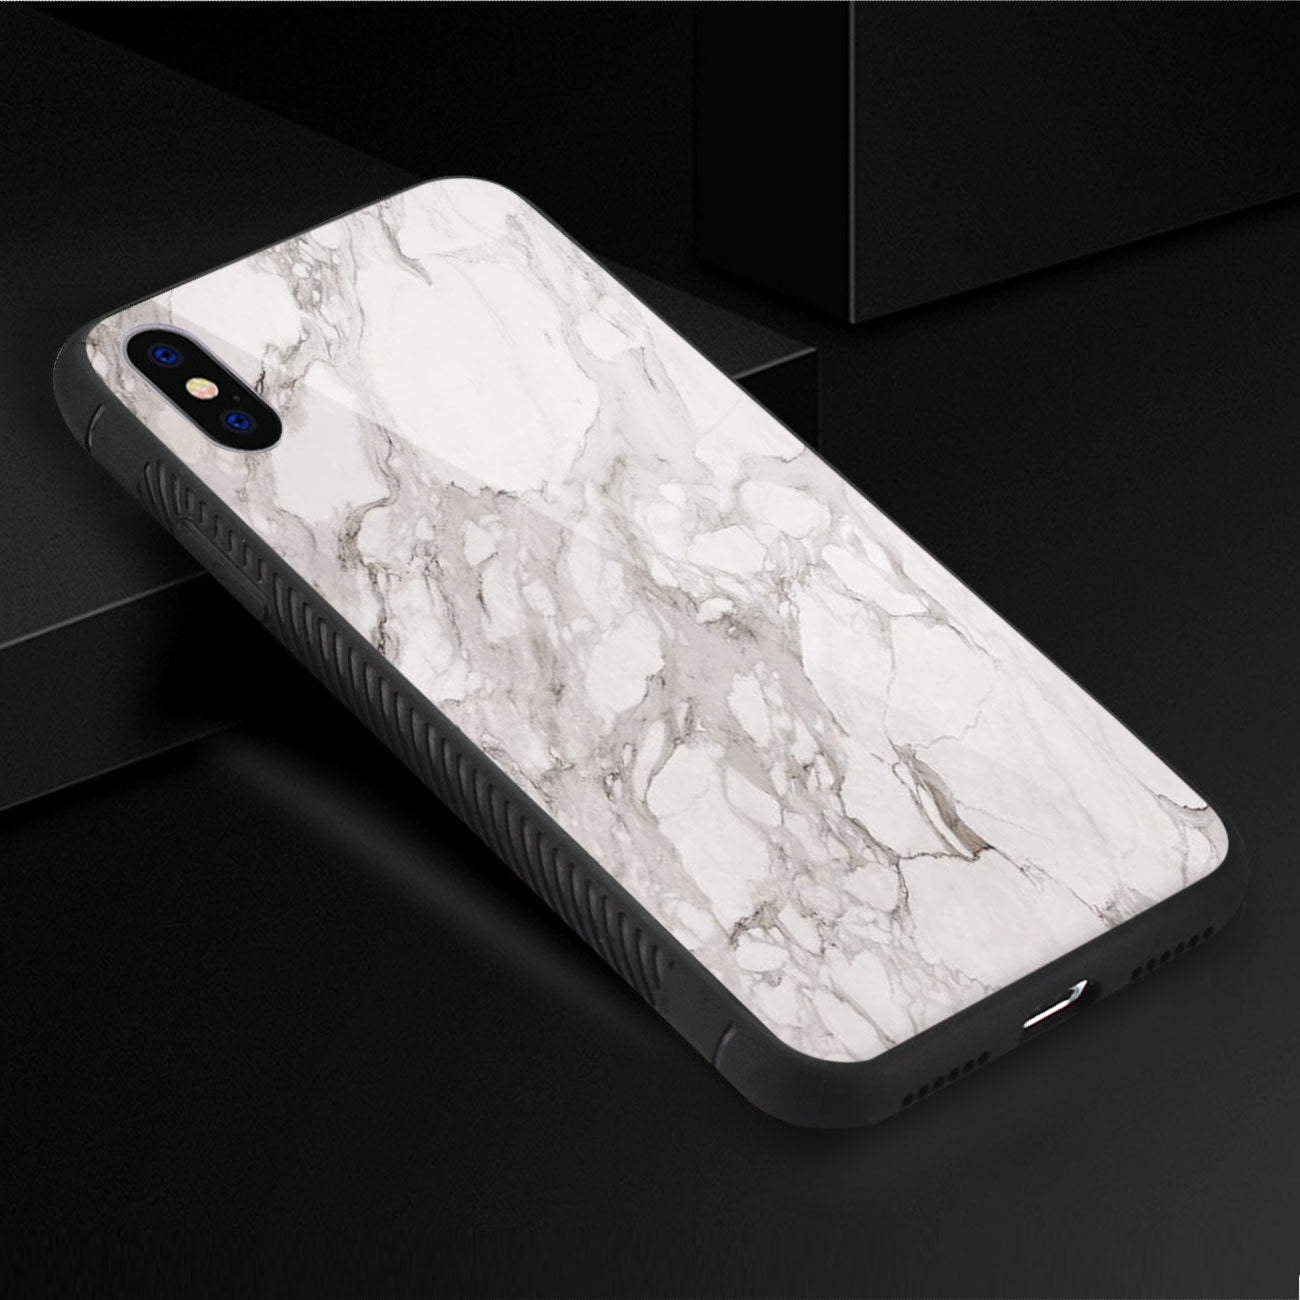 Reiko iPhone X/iPhone XS Hard Glass Design TPU Case With White Marble